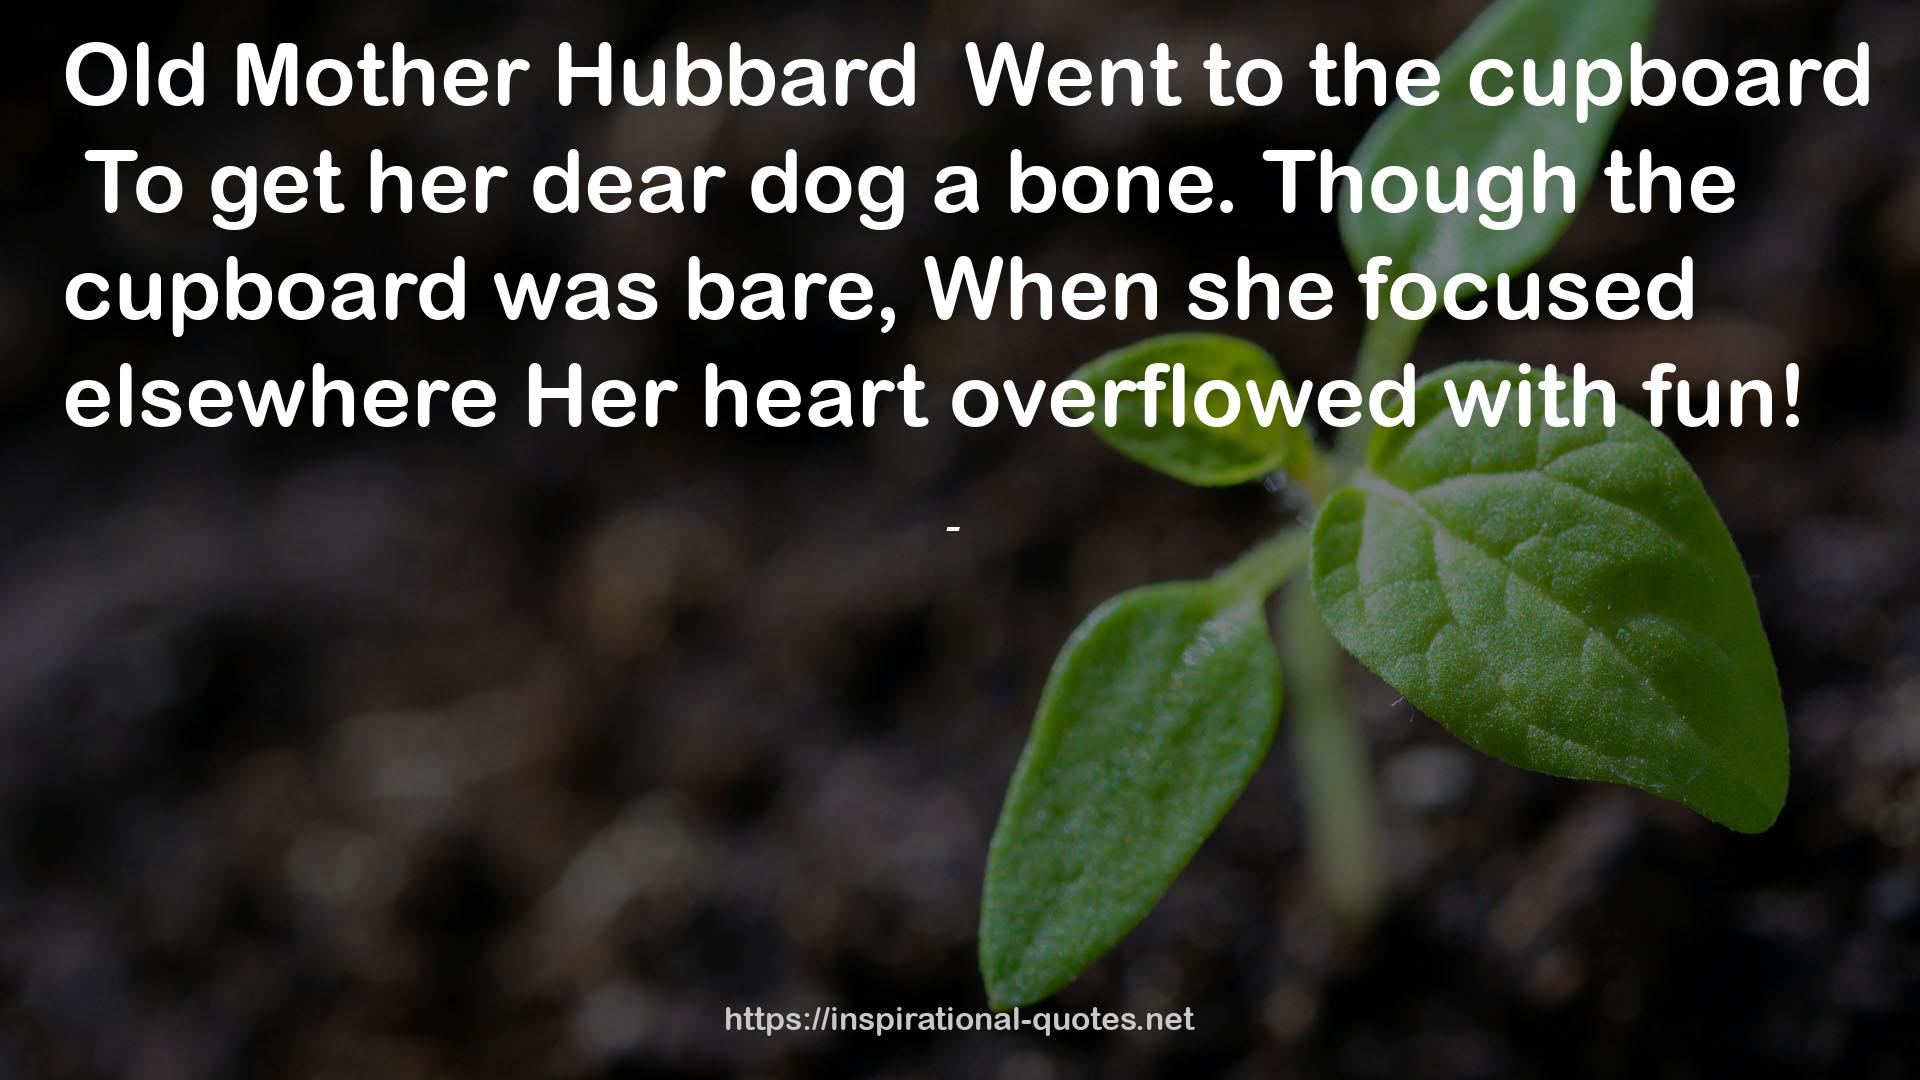 her dear dog  QUOTES